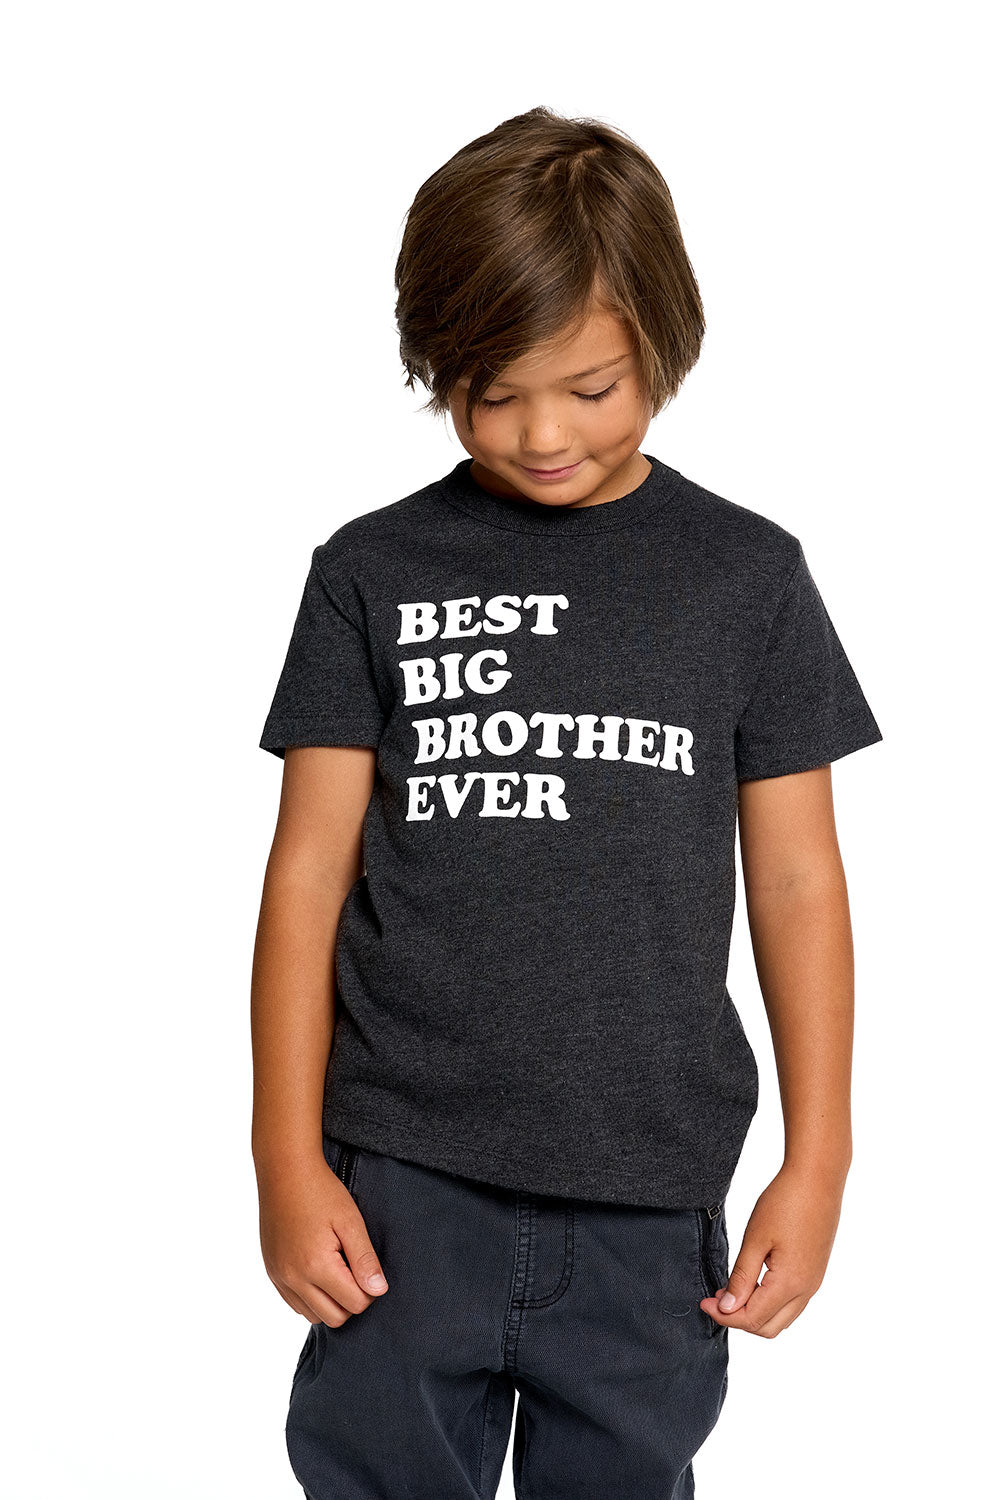 Best Big Brother BOYS chaserbrand